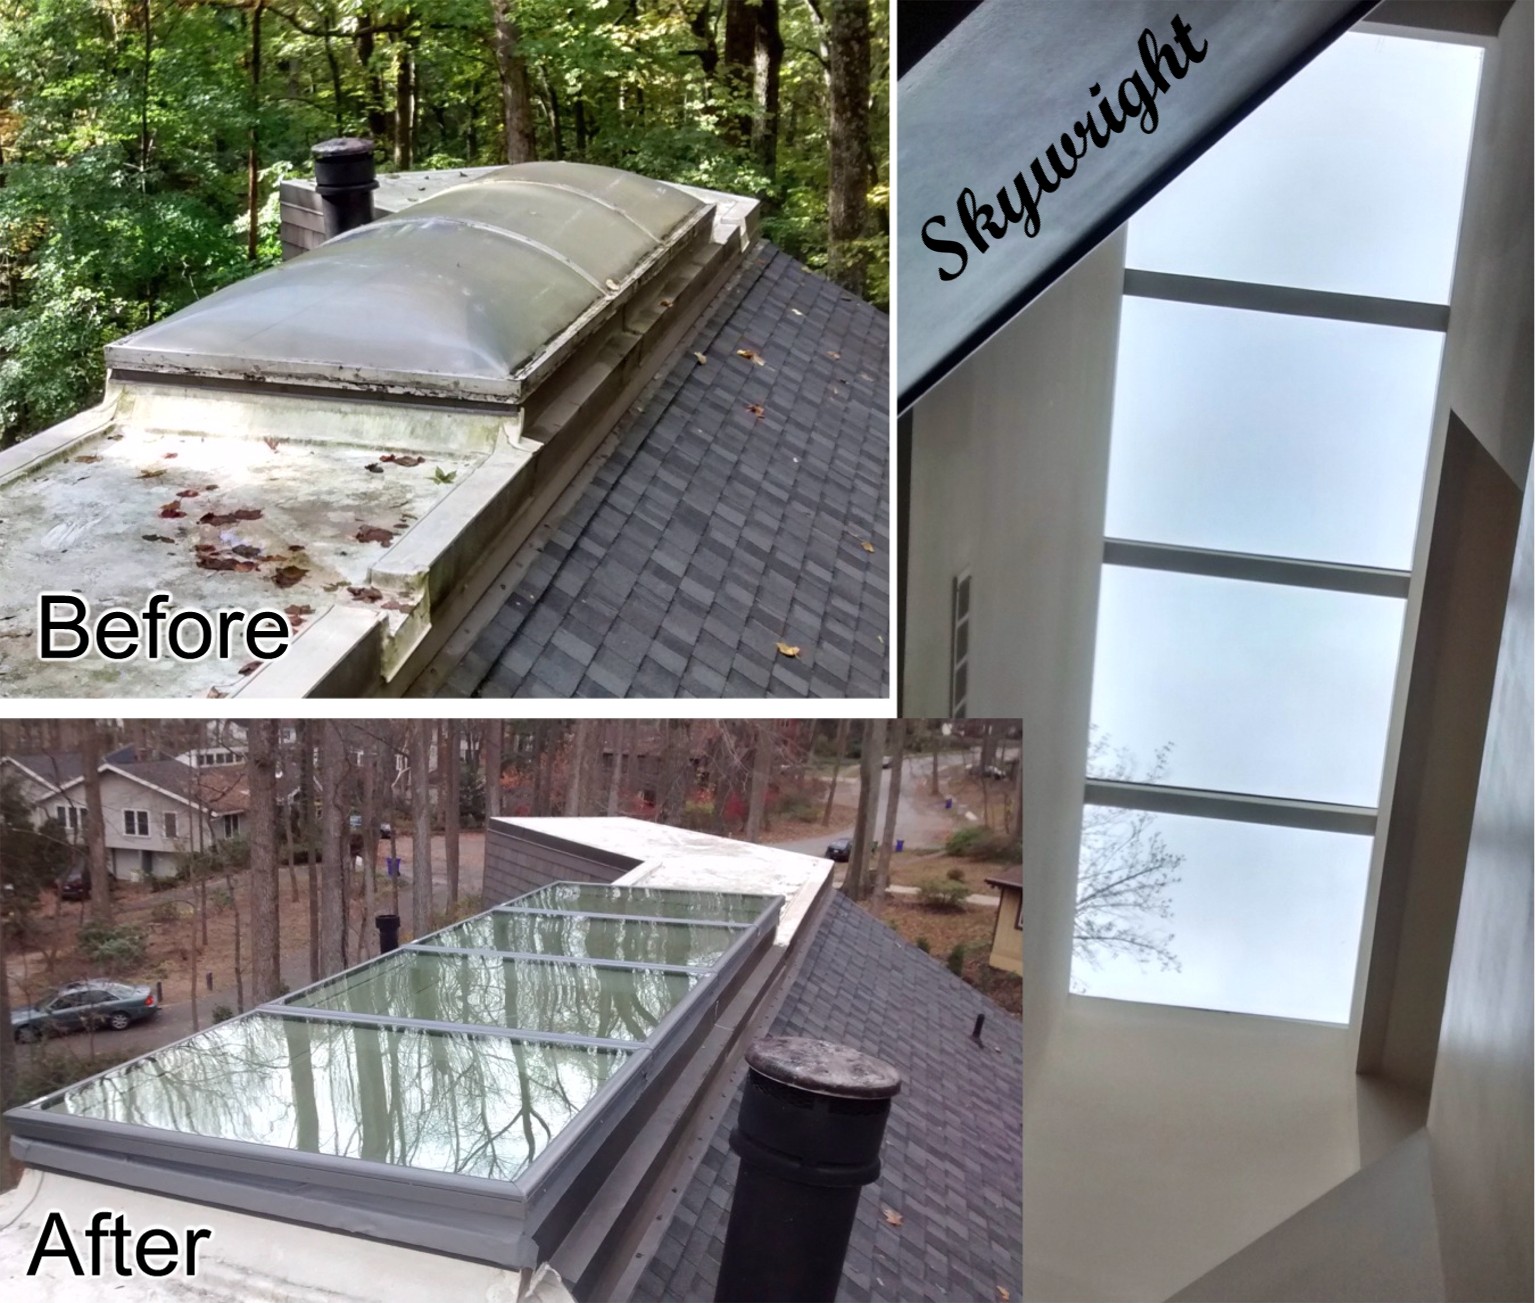 Large bubble skylight replaced with 4 Velux FCM skylights